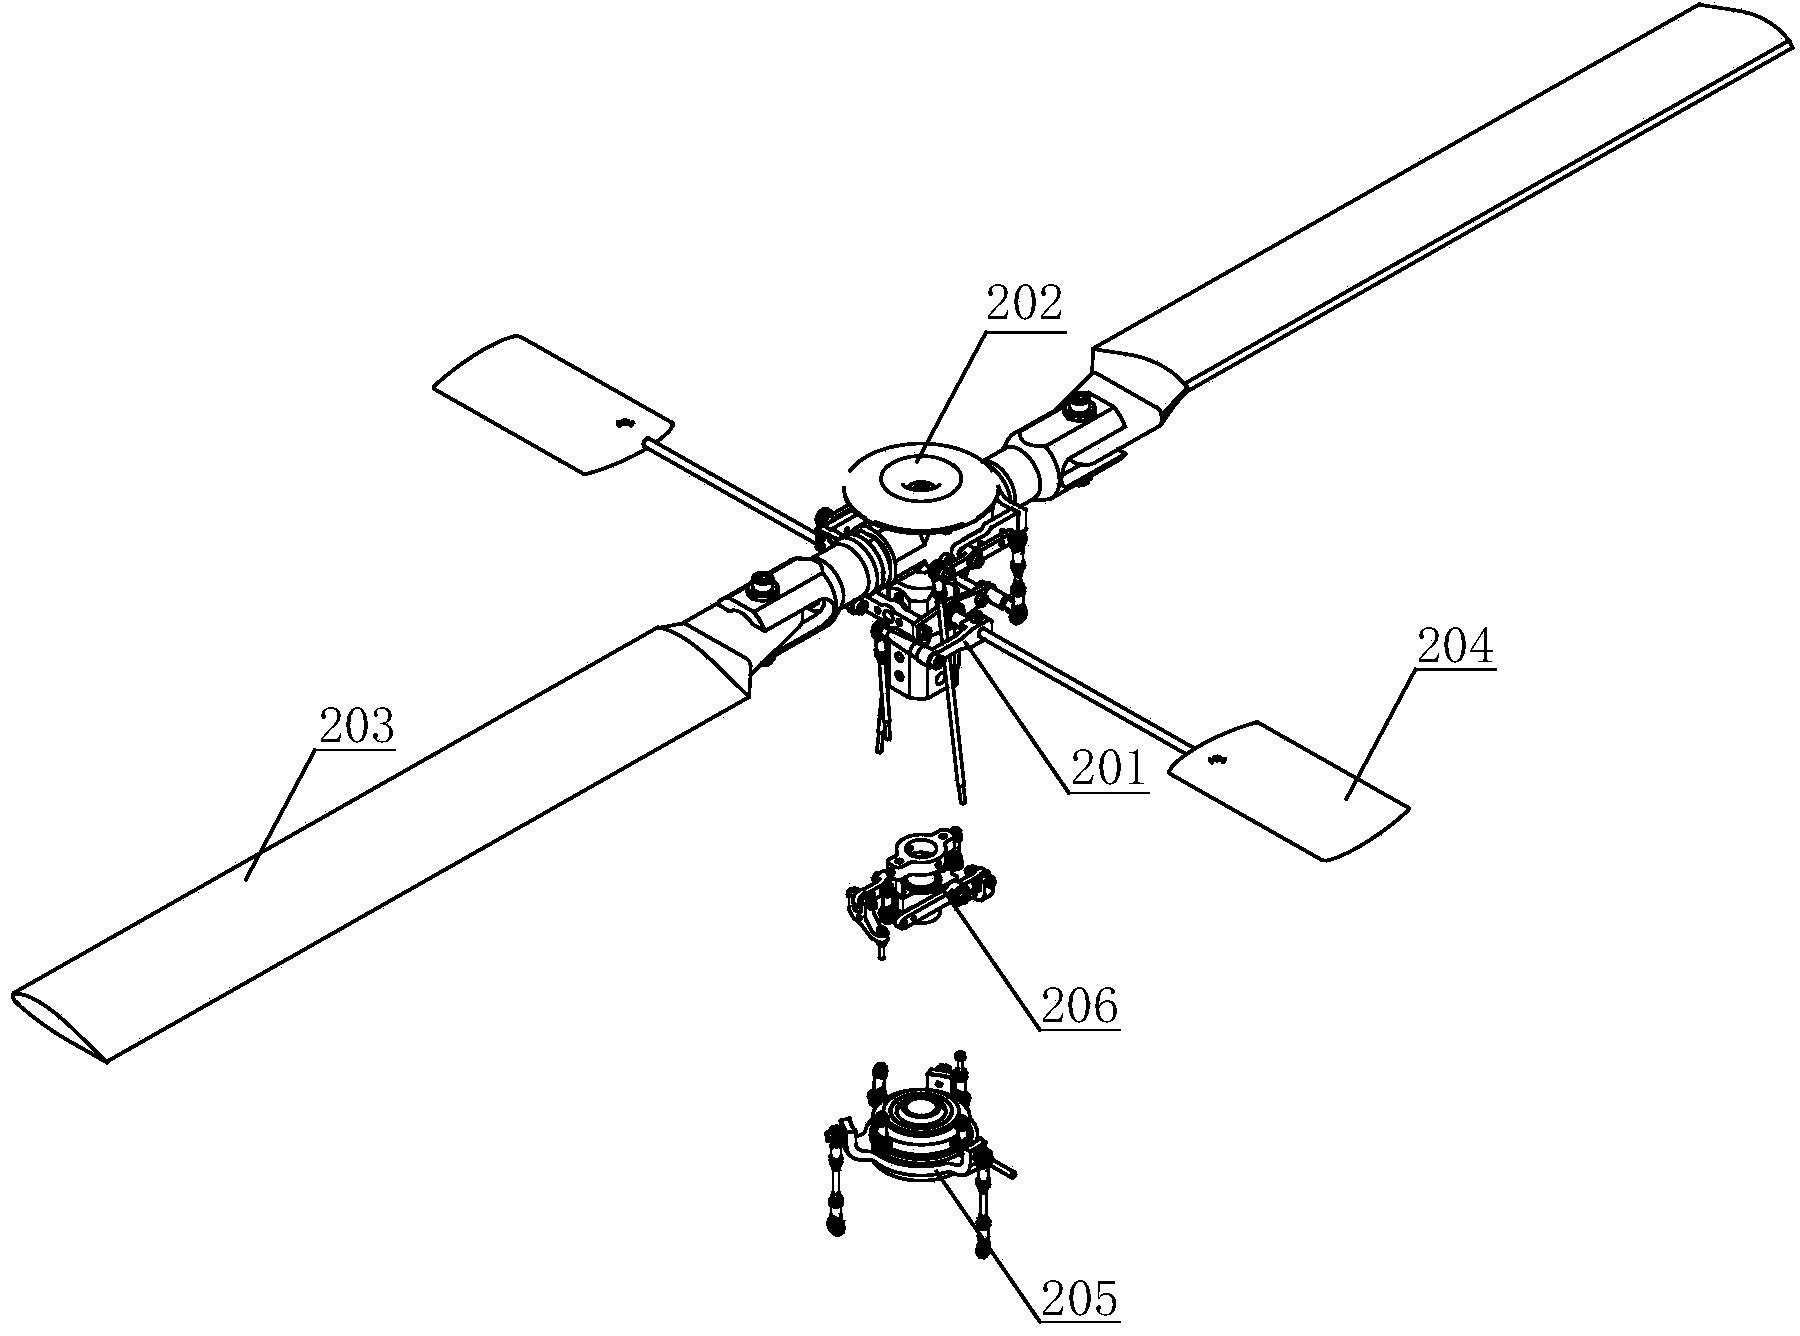 Engineering rotor-type unmanned aircraft